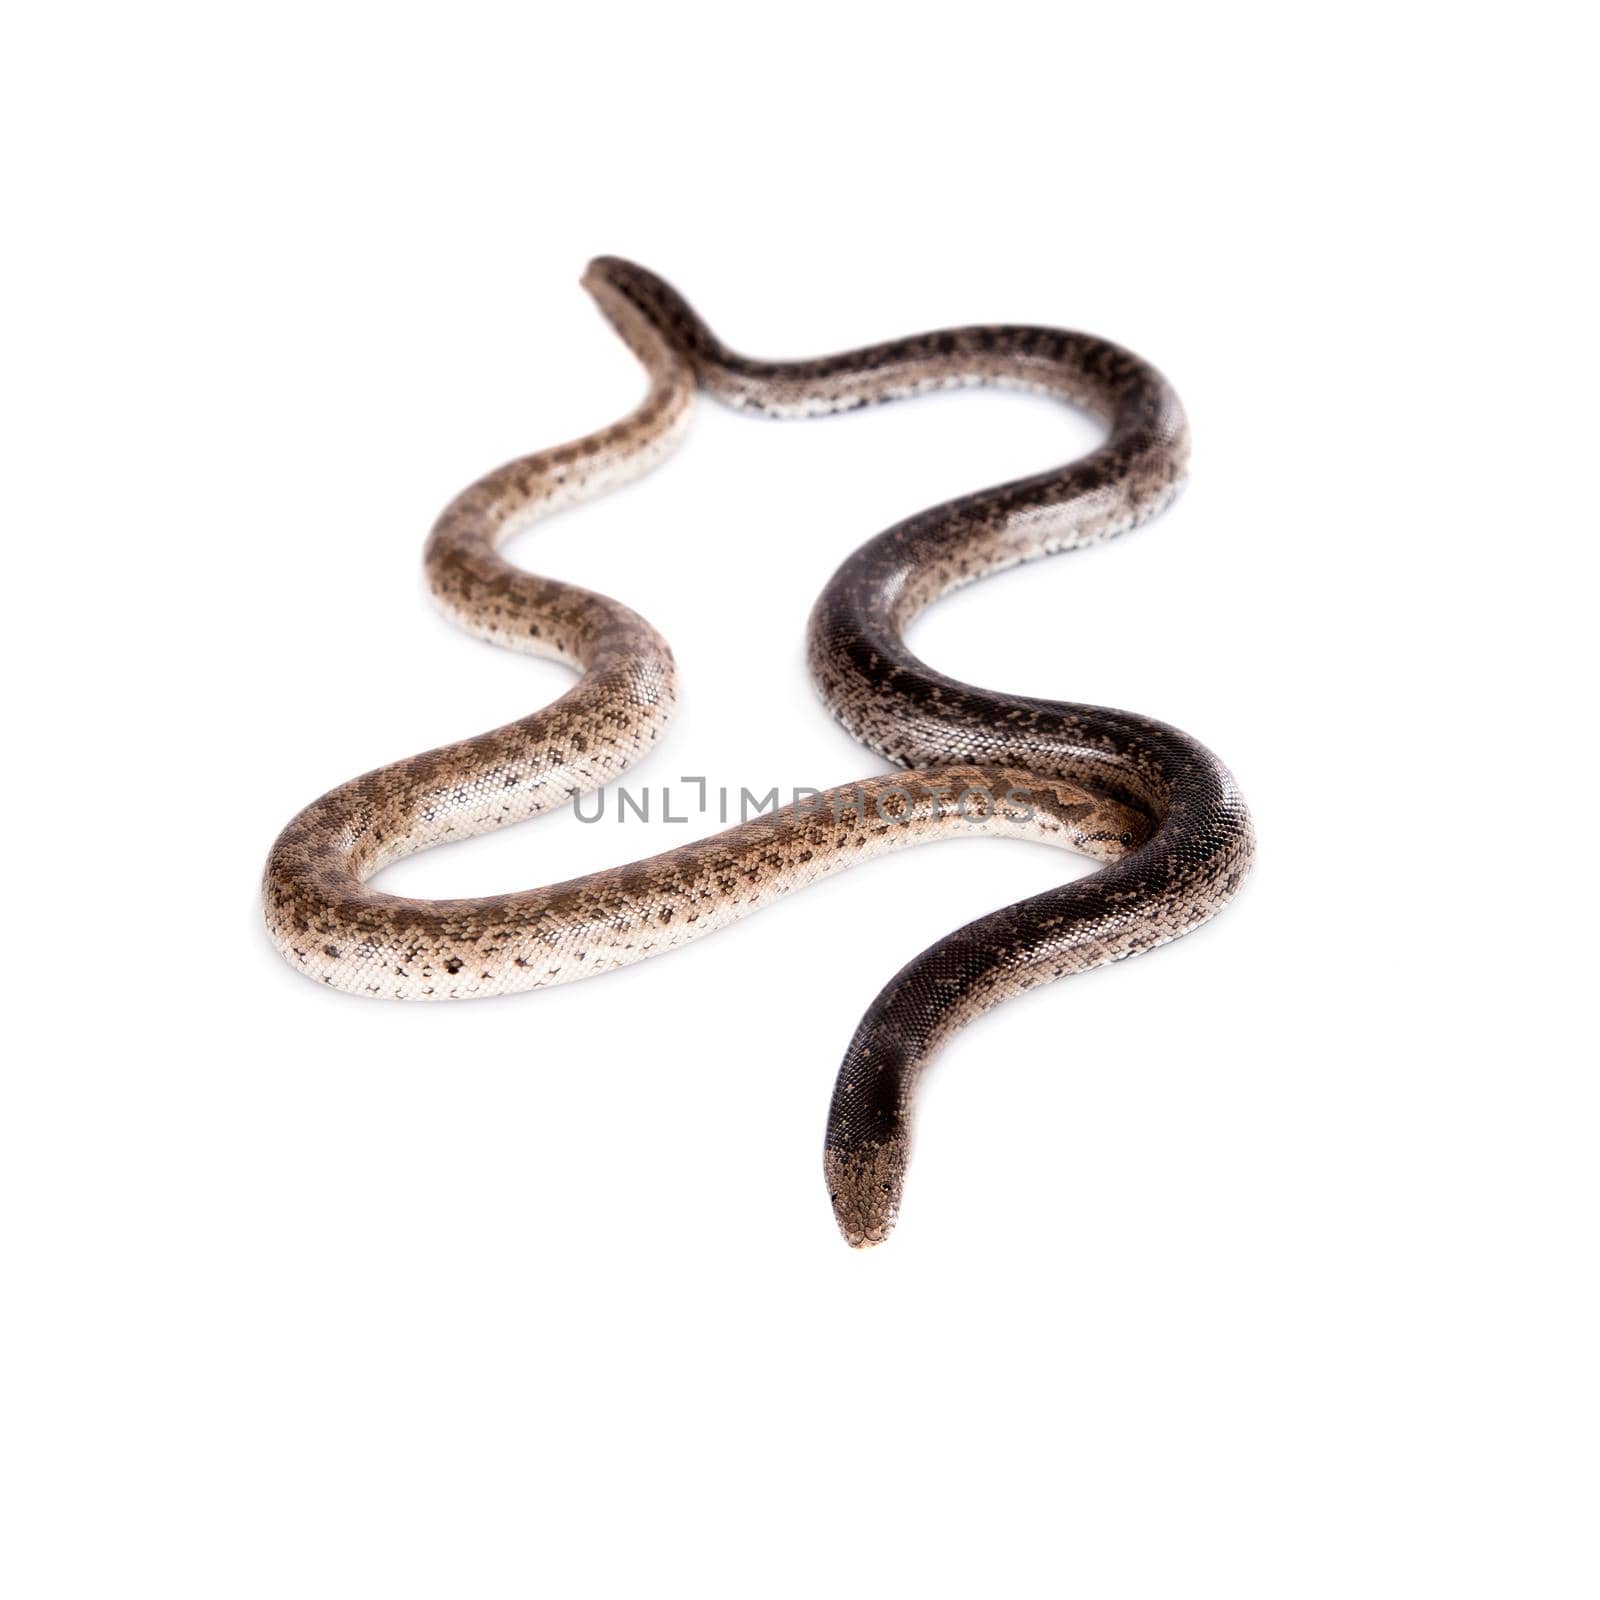 Two dwarf sand boas on white by RosaJay